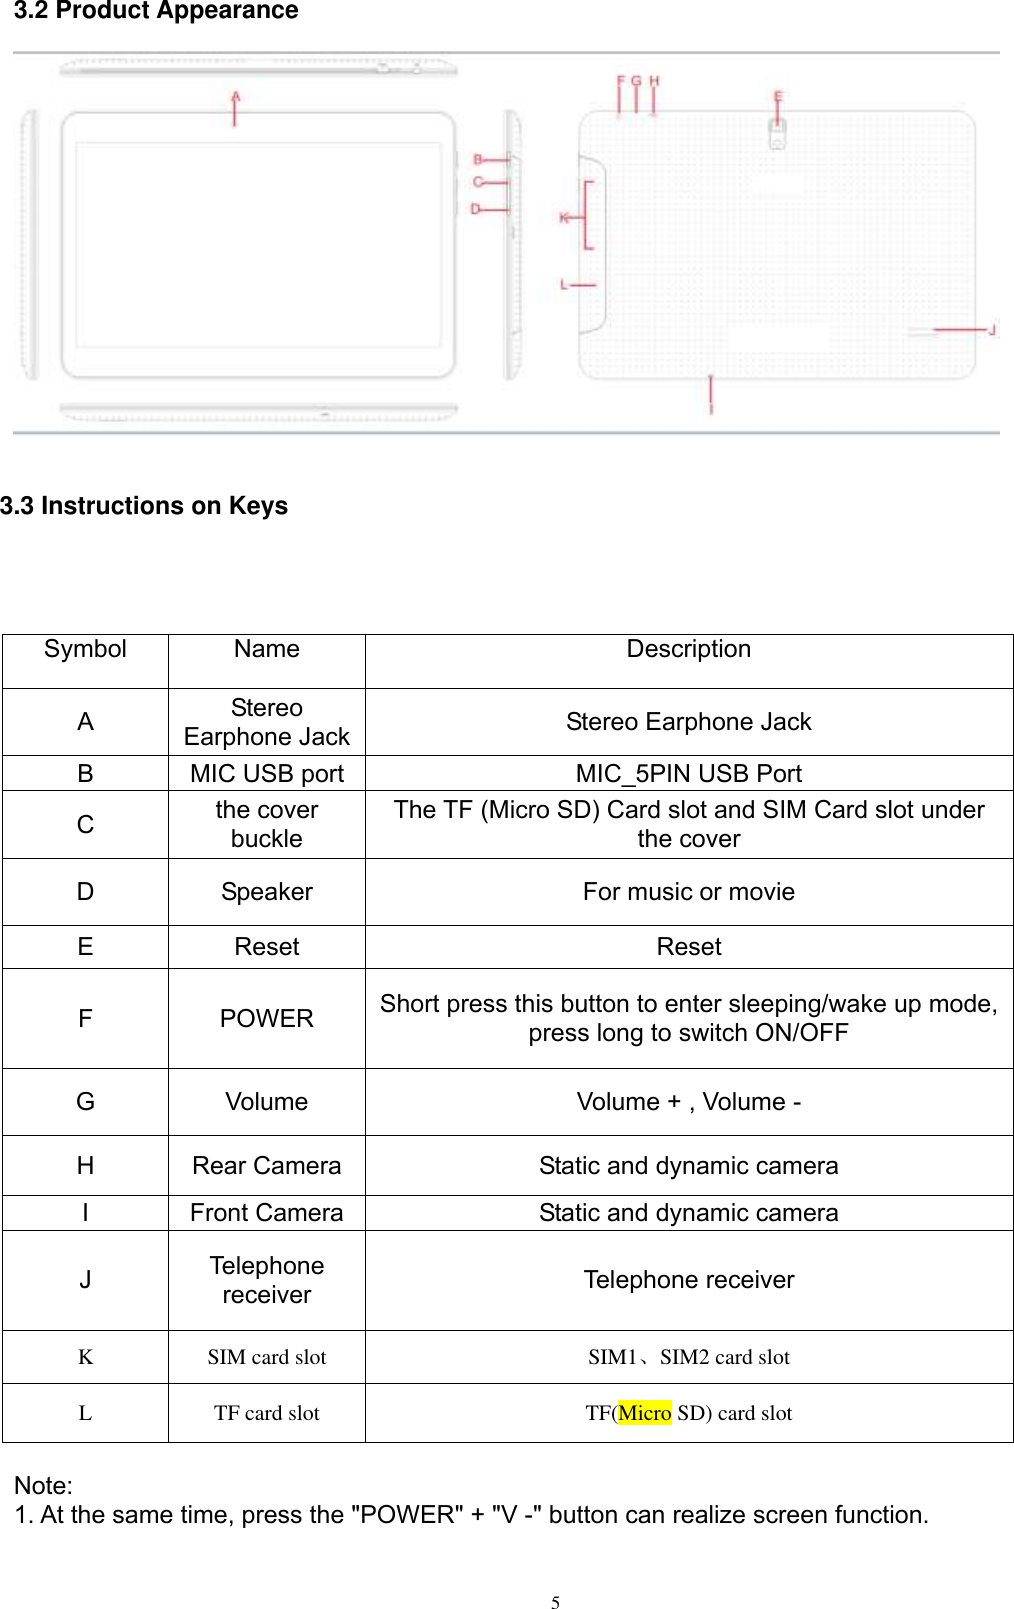      5 3.2 Product Appearance   3.3 Instructions on Keys    Symbol Name Description A Stereo Earphone Jack Stereo Earphone Jack B MIC USB port MIC_5PIN USB Port C the cover buckle The TF (Micro SD) Card slot and SIM Card slot under the cover D Speaker For music or movie E Reset   Reset     F POWER Short press this button to enter sleeping/wake up mode, press long to switch ON/OFF G Volume Volume + , Volume - H Rear Camera Static and dynamic camera I Front Camera Static and dynamic camera J Telephone receiver Telephone receiver K SIM card slot SIM1、SIM2 card slot L TF card slot TF(Micro SD) card slot  Note:   1. At the same time, press the &quot;POWER&quot; + &quot;V -&quot; button can realize screen function.  